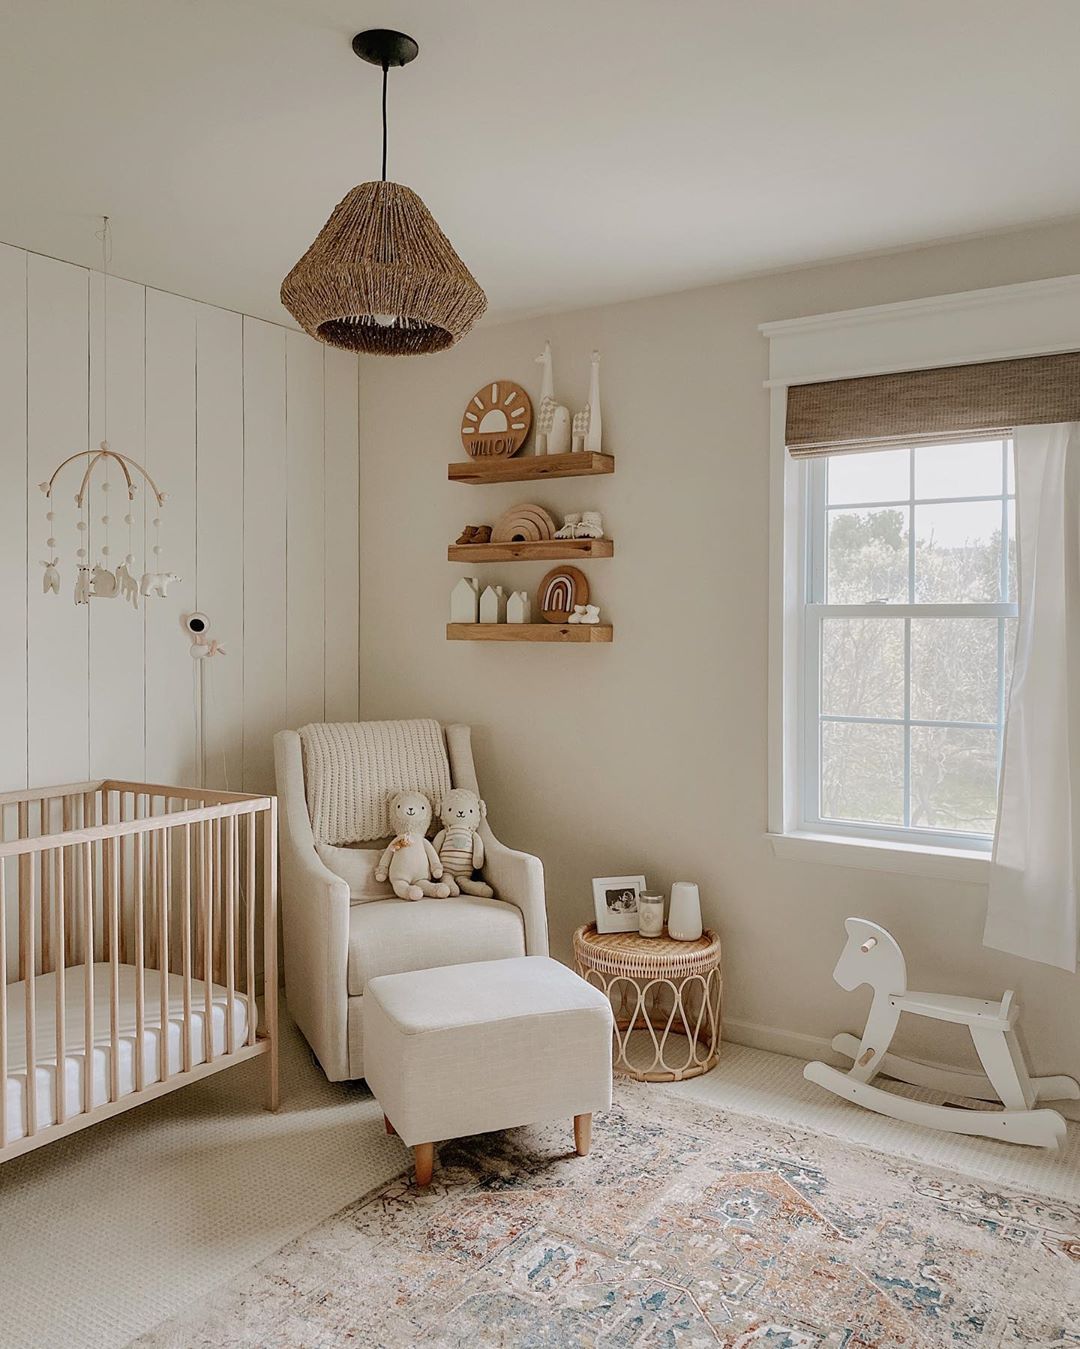 Ideas for your baby room decoration with
lots of love